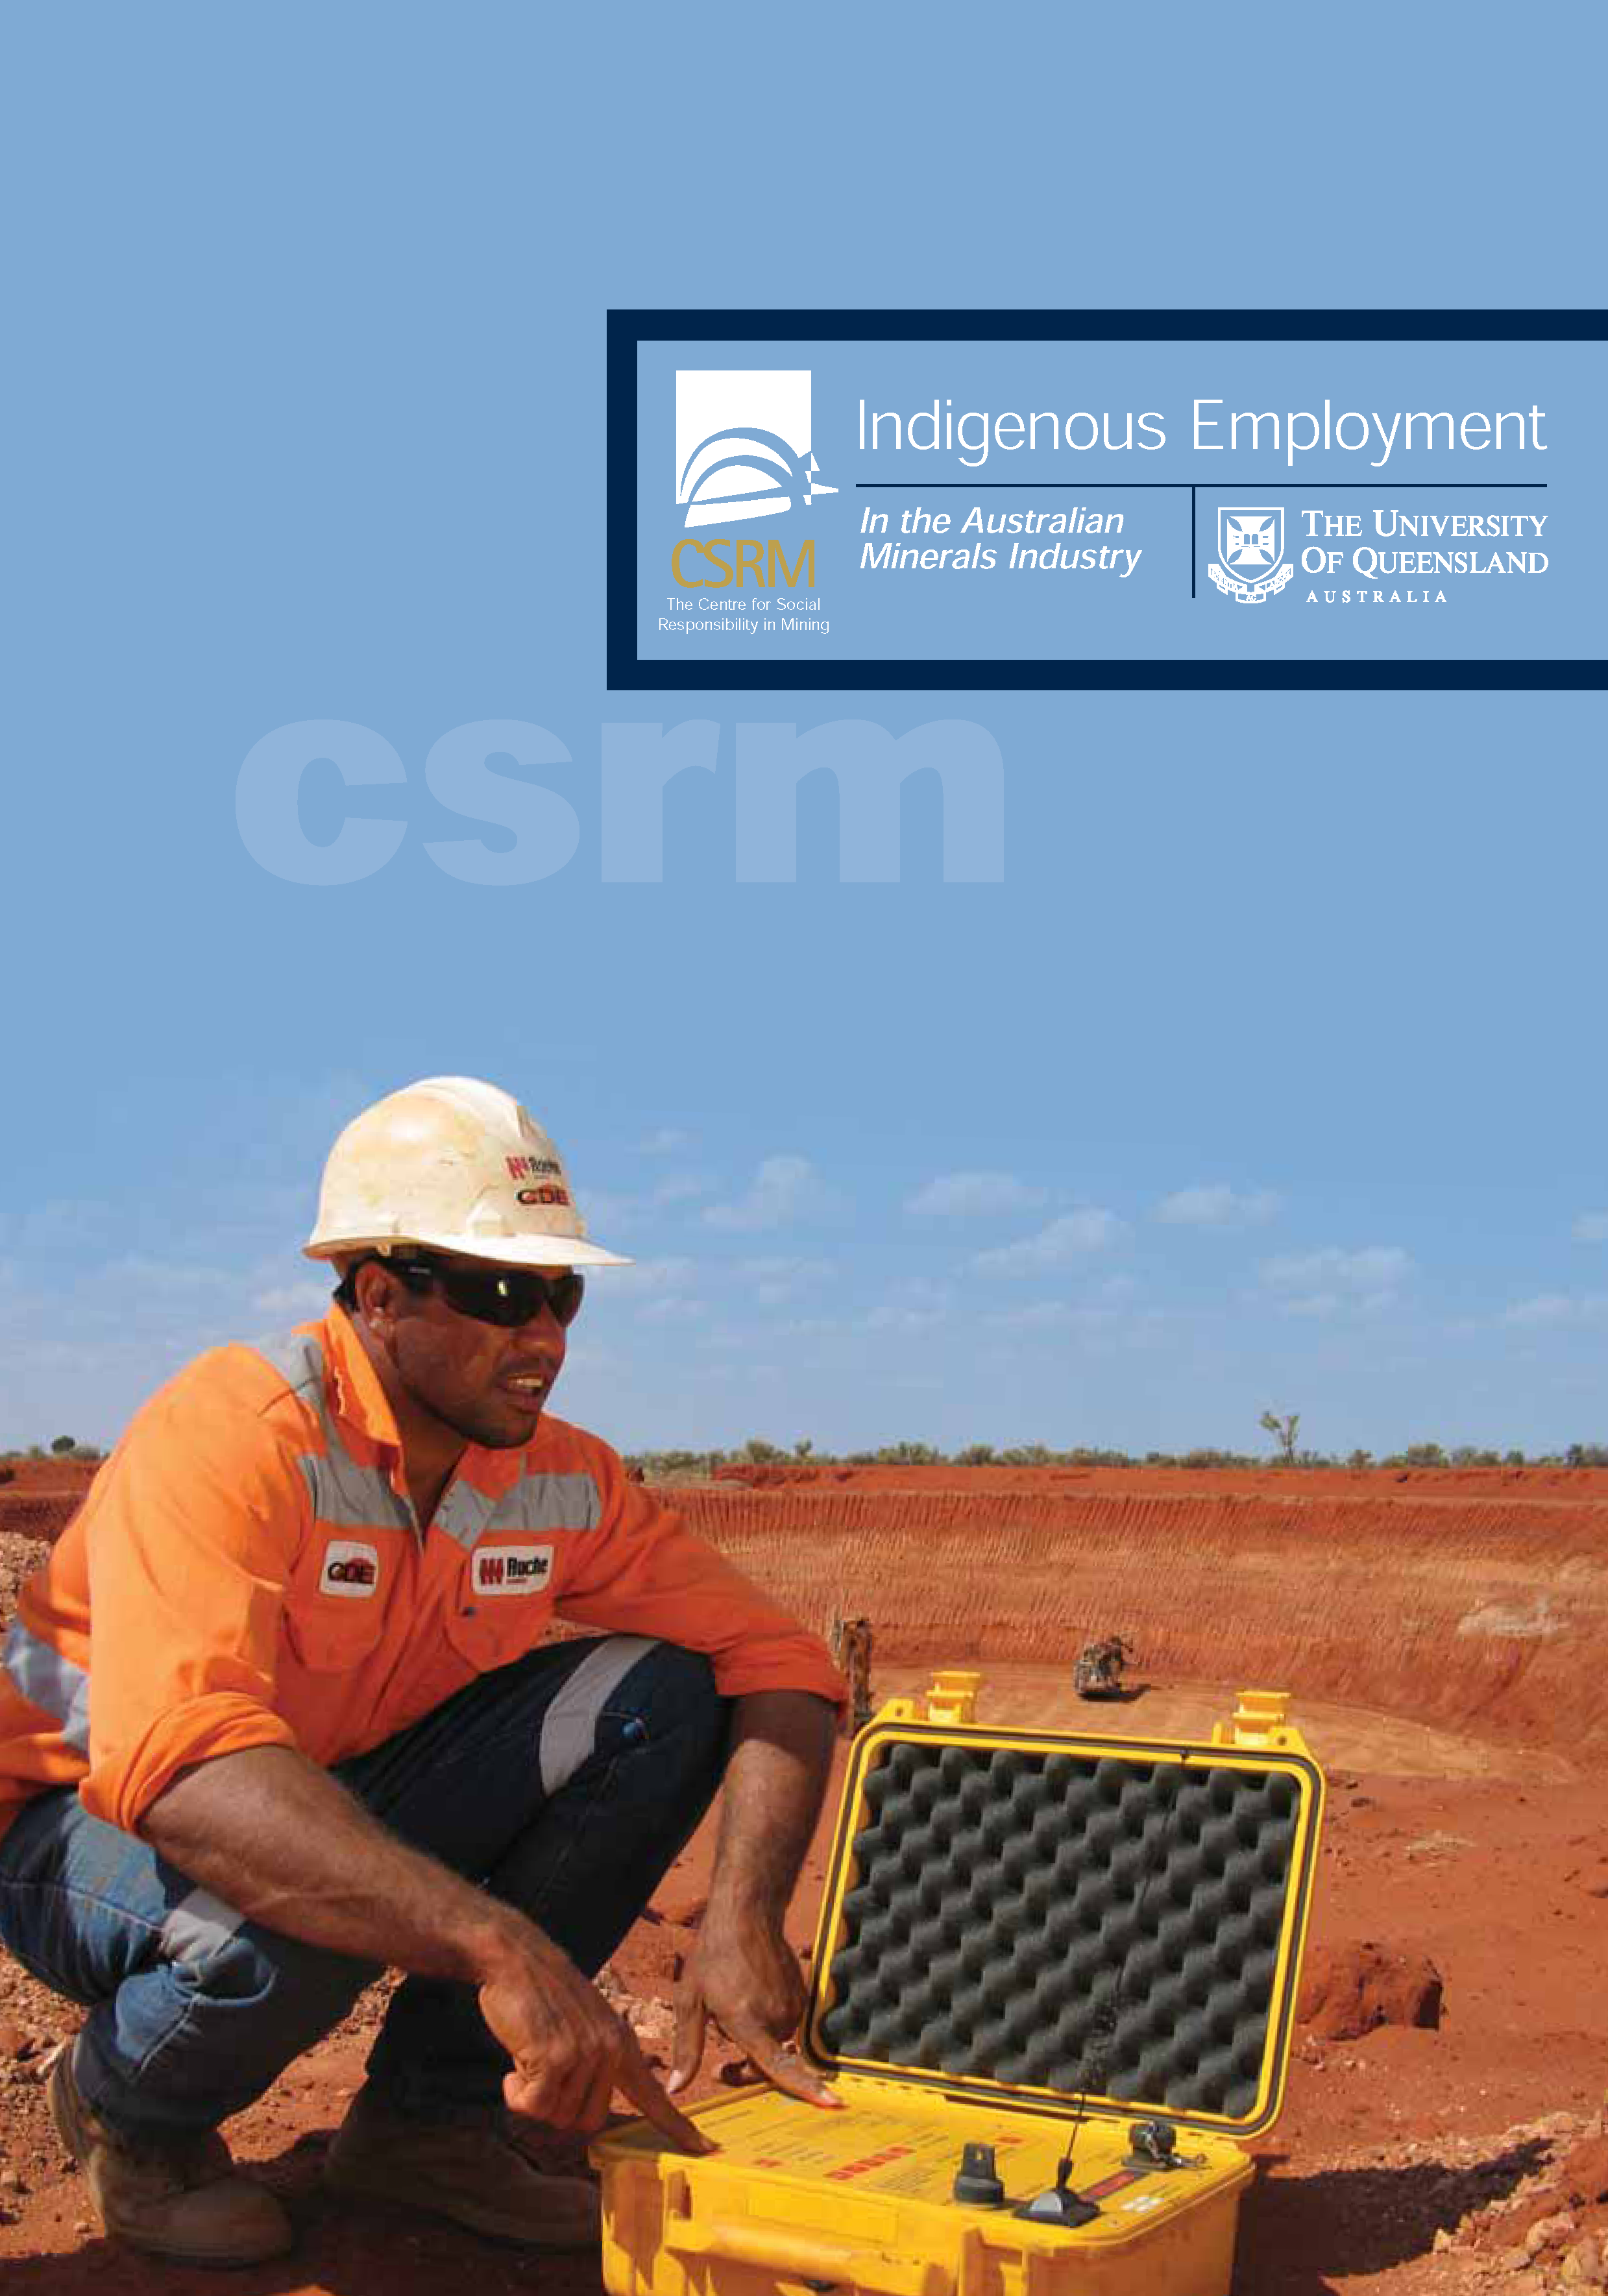 Indigenous Employment in the Australian Minerals Industry